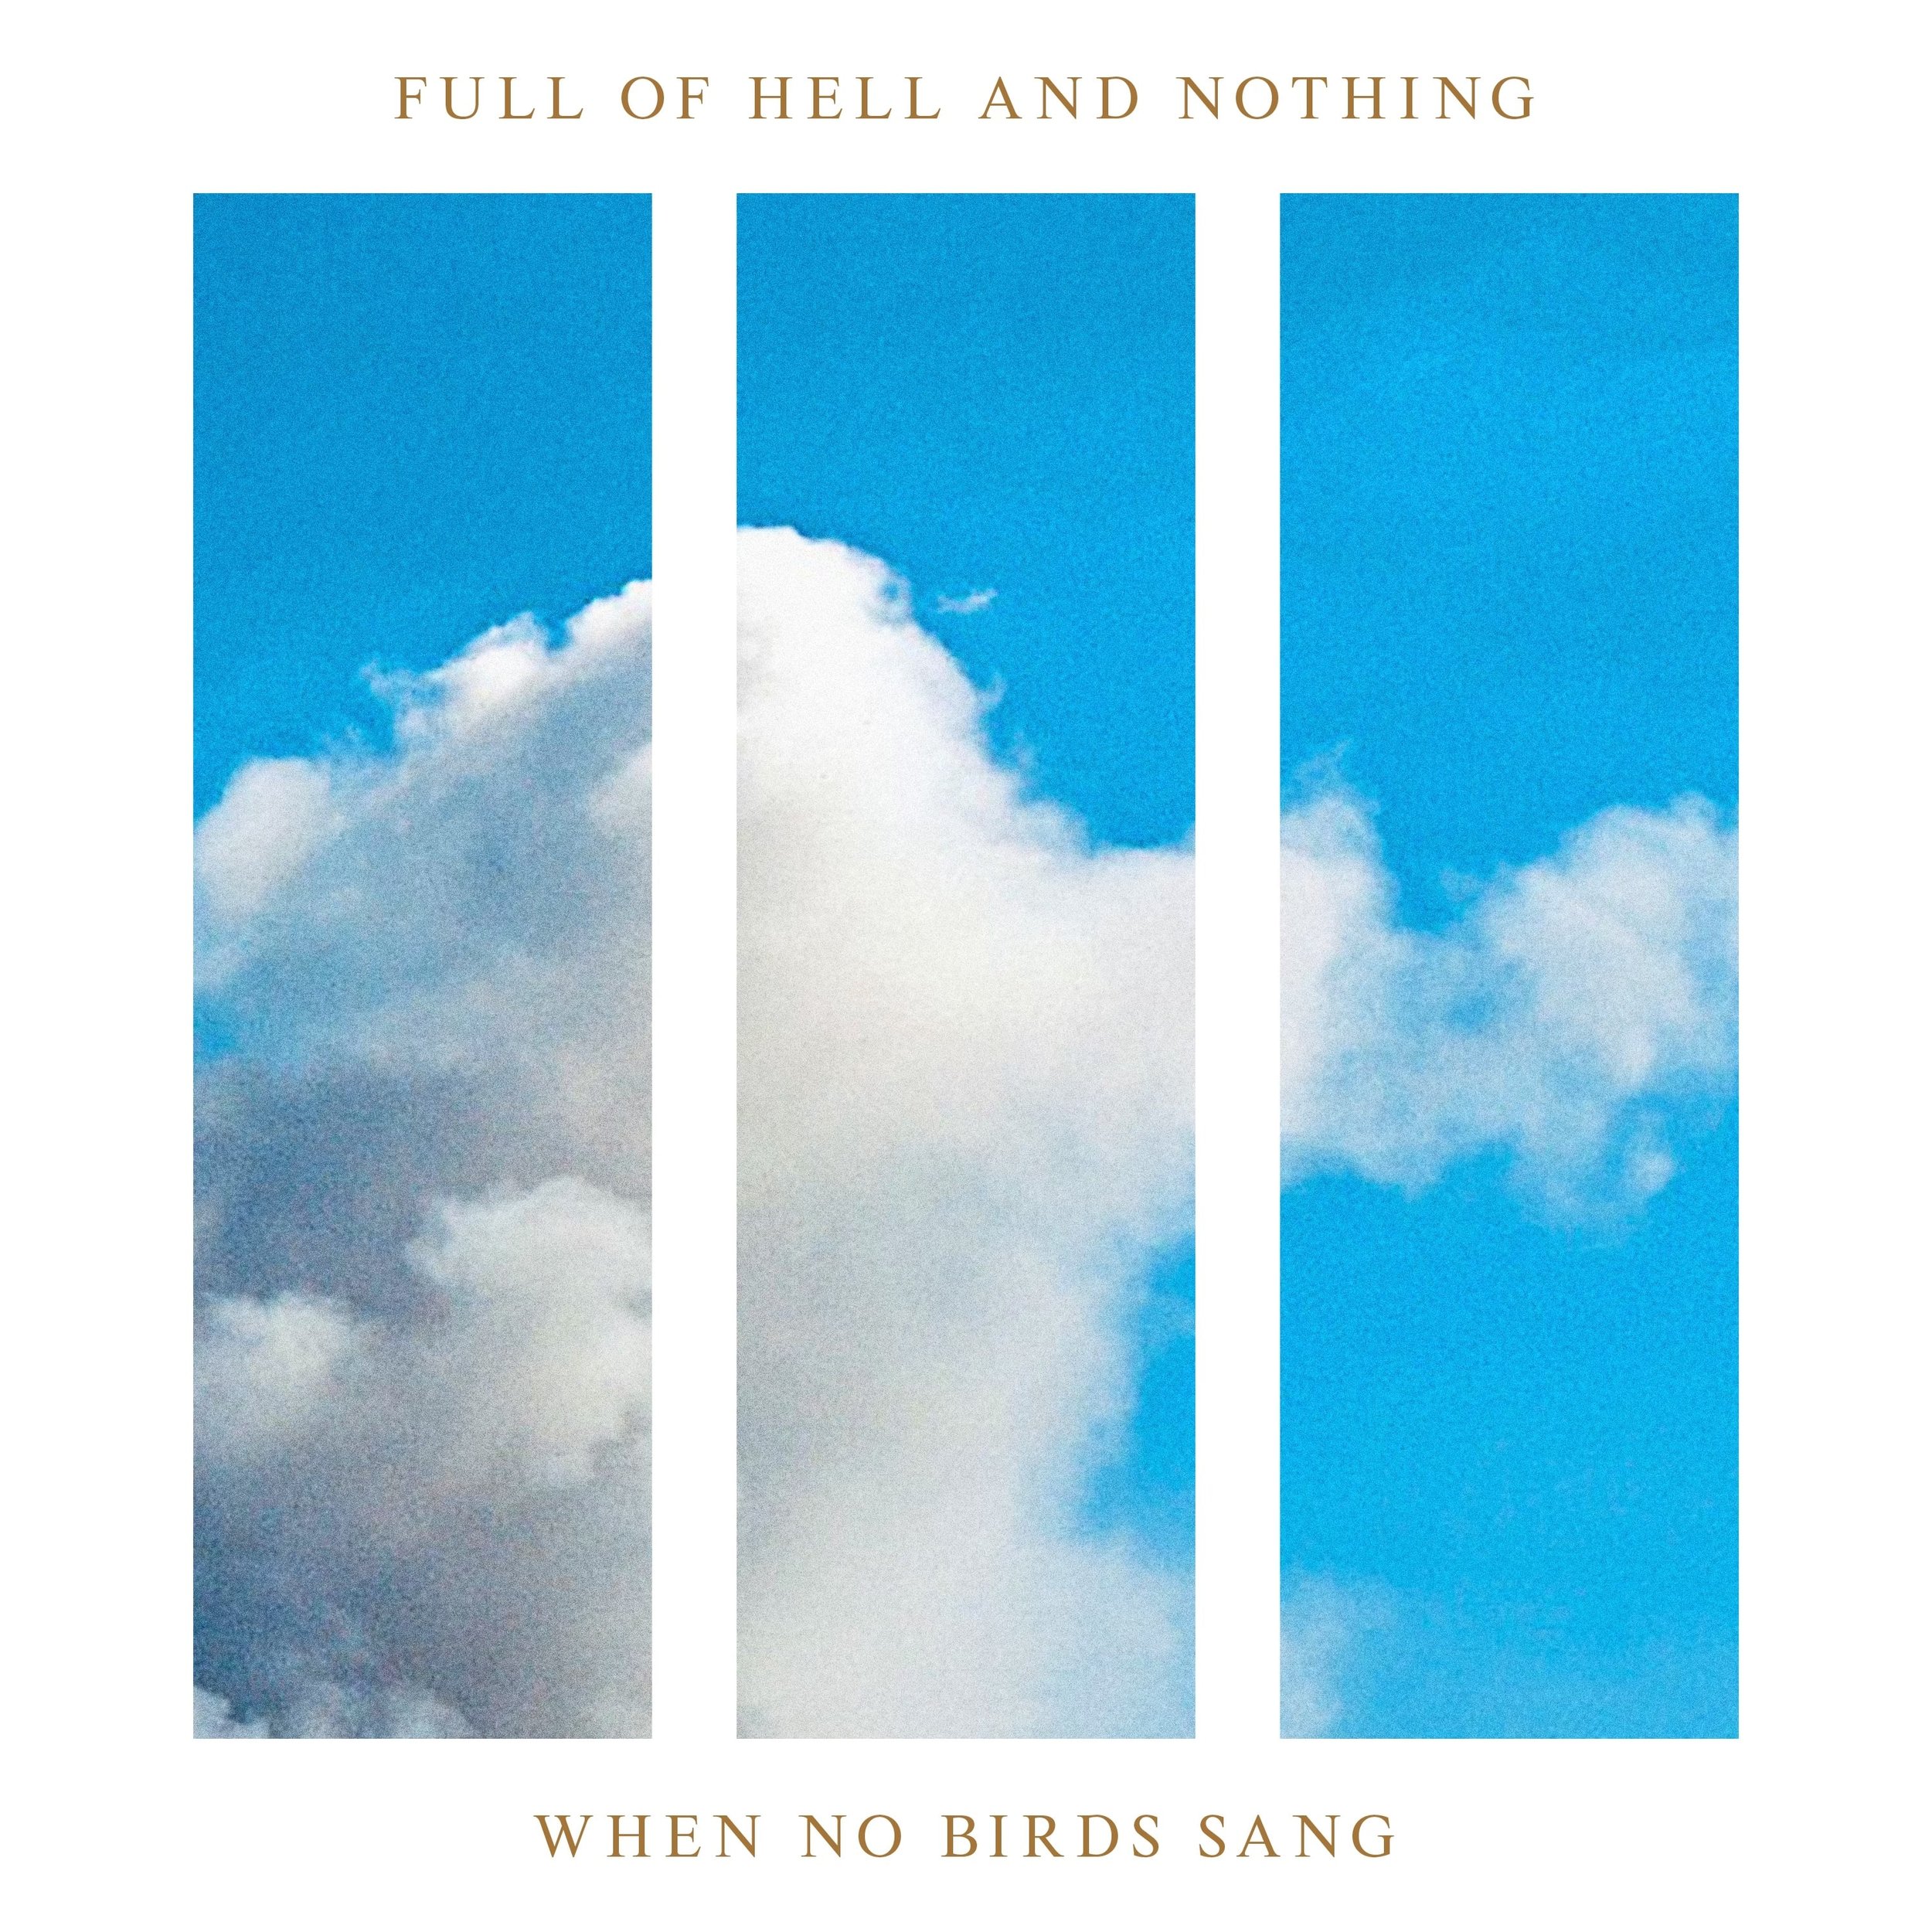 Full of Hell and Nothing - When No Birds Sang - Cover.jpg